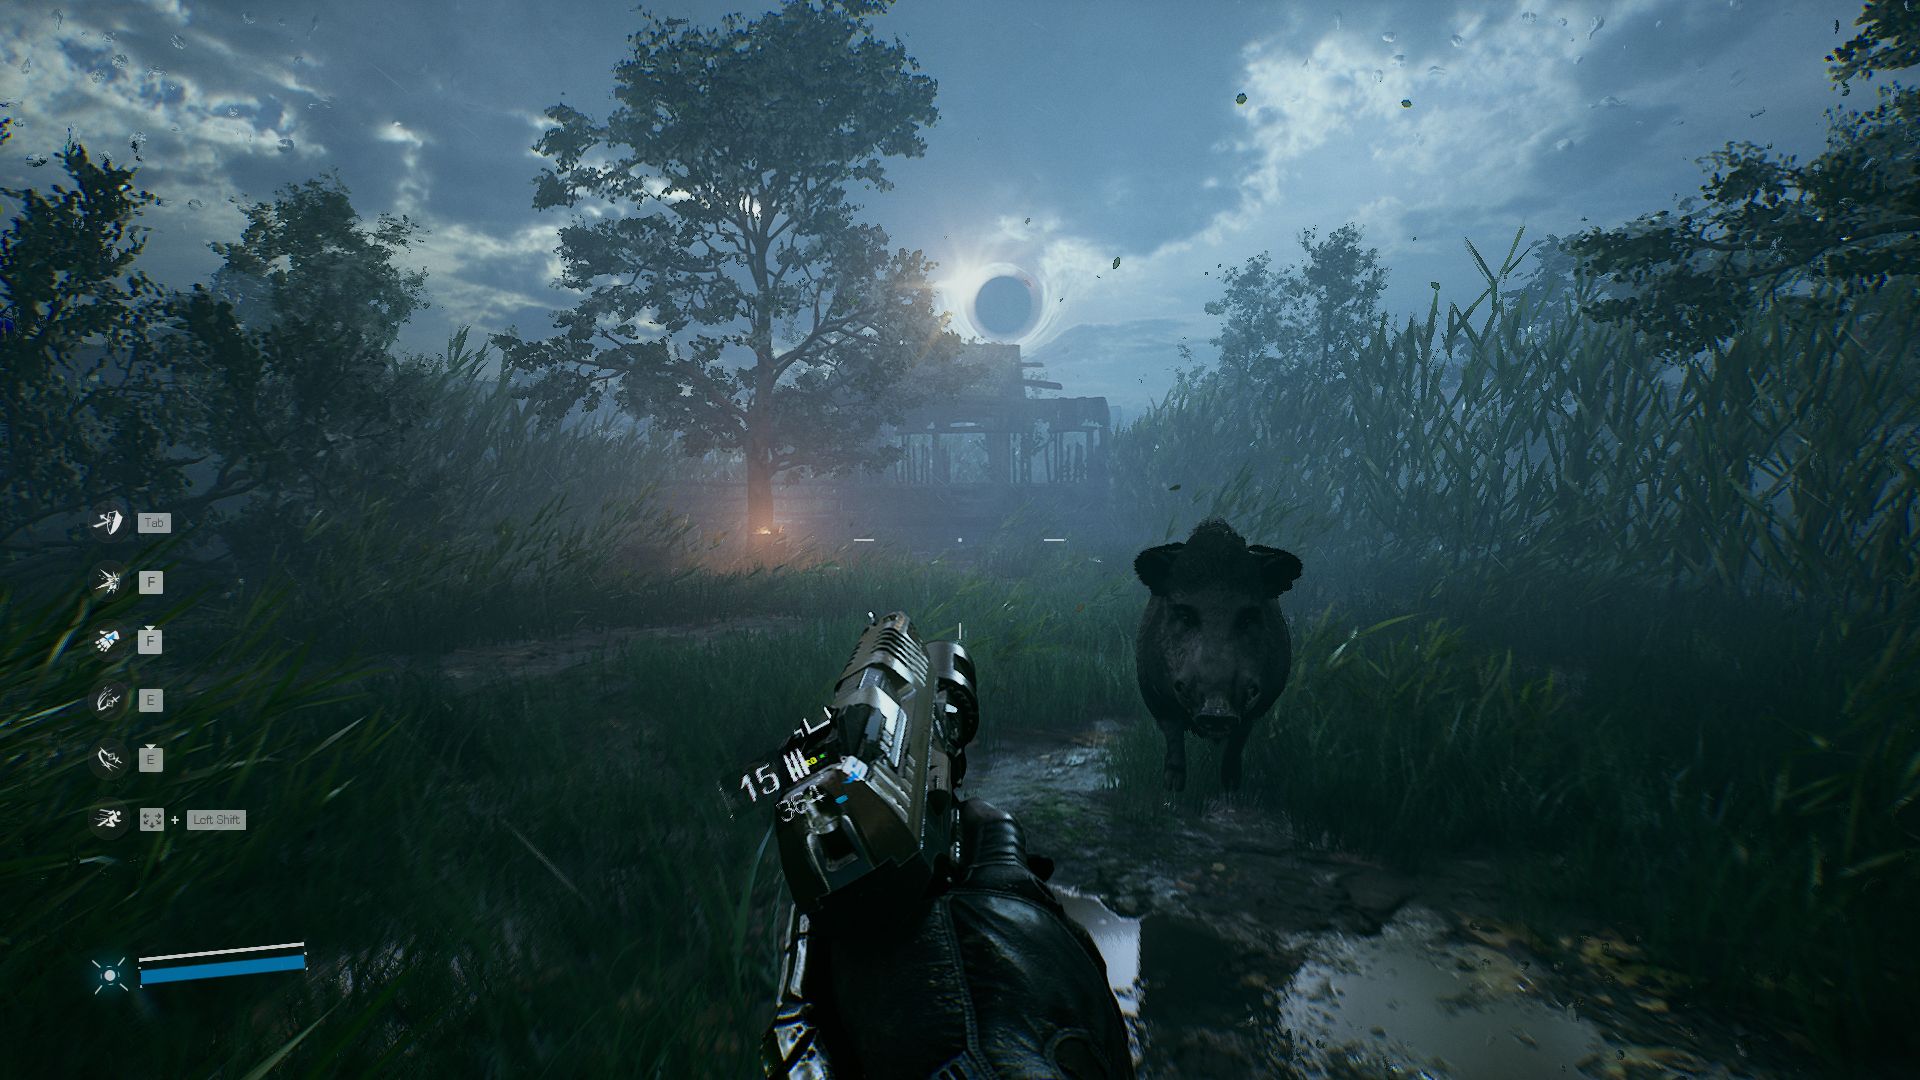 The player points a gun at a wild boar in Bright Memory Infinite